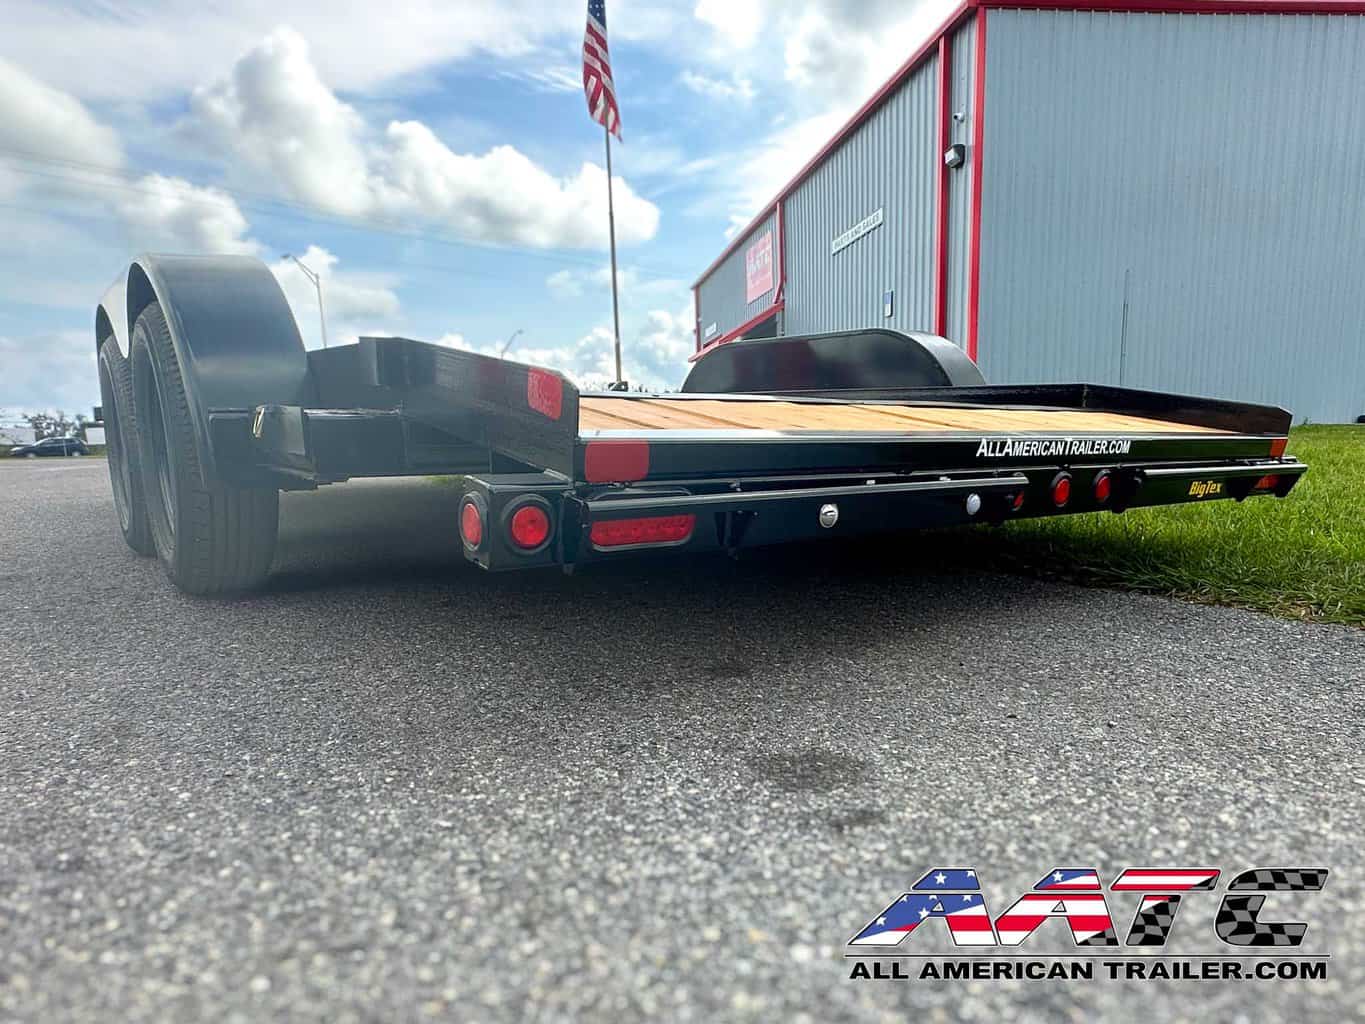 A reliable and versatile 16-foot car hauler trailer from Big Tex, model 70CH. This Big Tex Trailer features a tandem axle, wood deck, and a convenient dovetail design. With a 7000 GVWR, electric brakes, and a load capacity of 5118 lbs, it's a dependable choice for various utility and car hauling needs. The bumper pull tongue type makes it easy to tow and transport your vehicles.